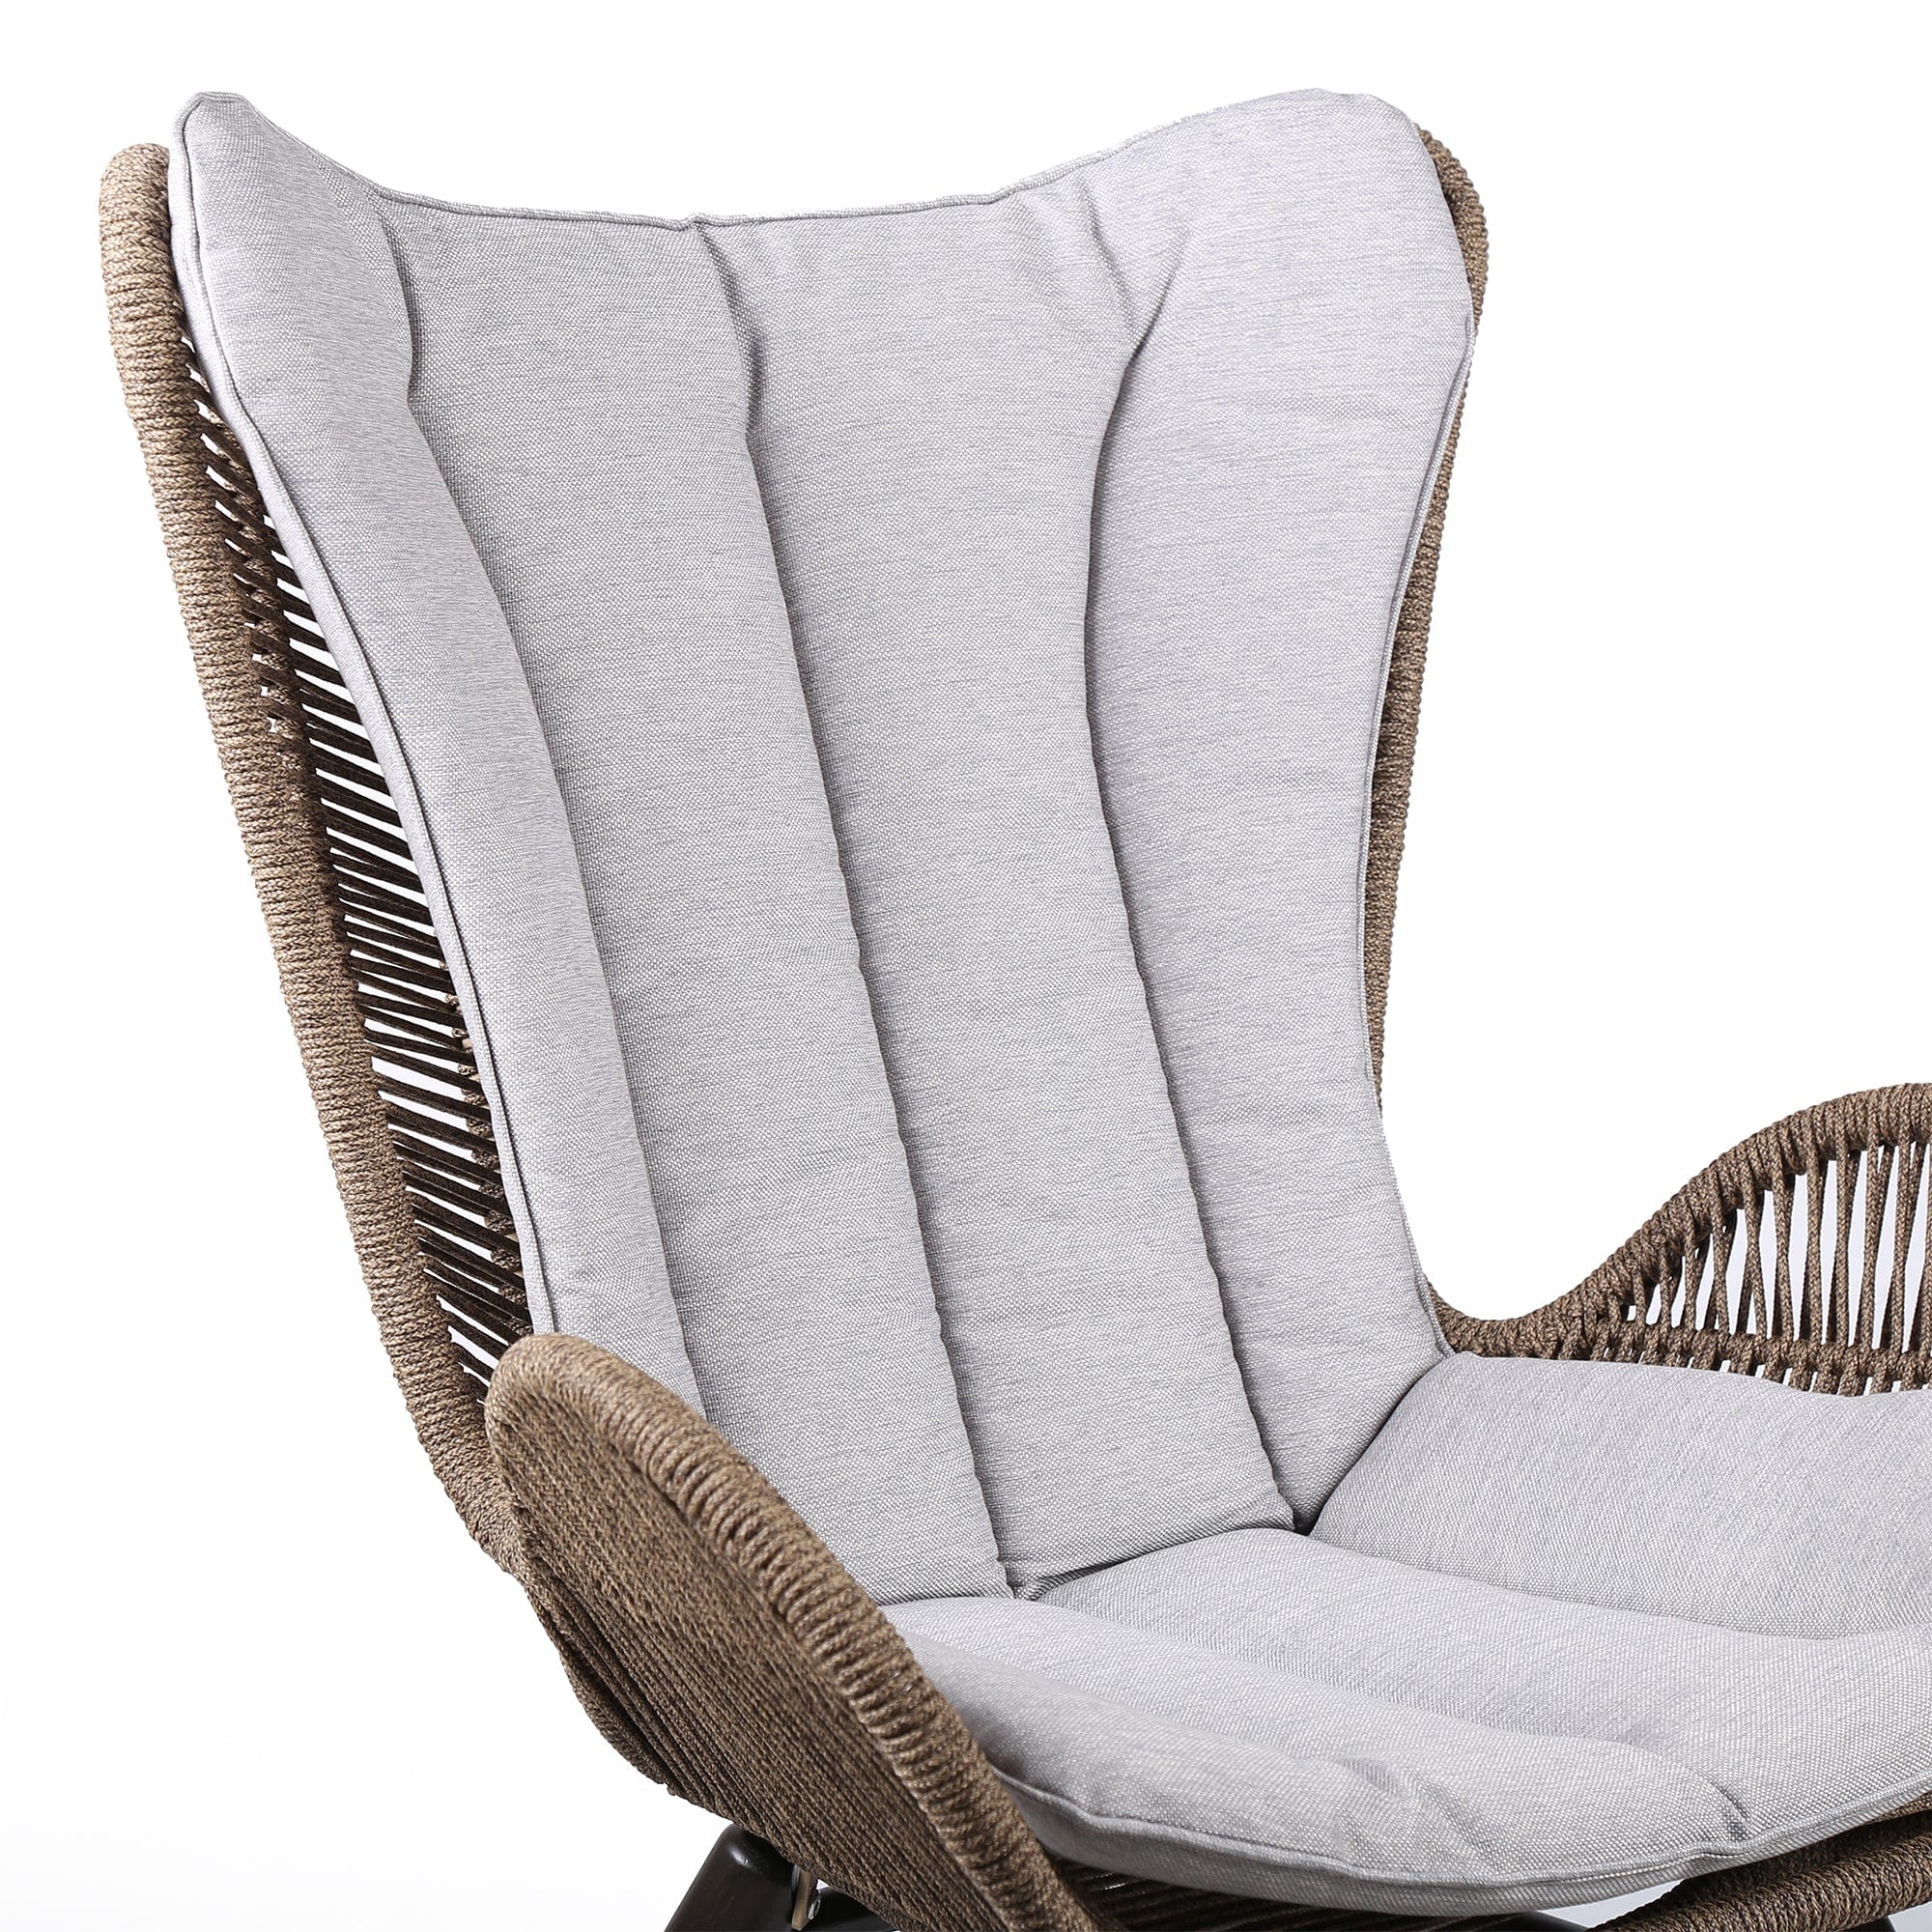 Armen Living Outdoor Lounge Chair Armen Living | King Indoor Outdoor Lounge Chair in Dark Eucalyptus Wood with Truffle Rope and Grey Cushion | LCKGCHTRU